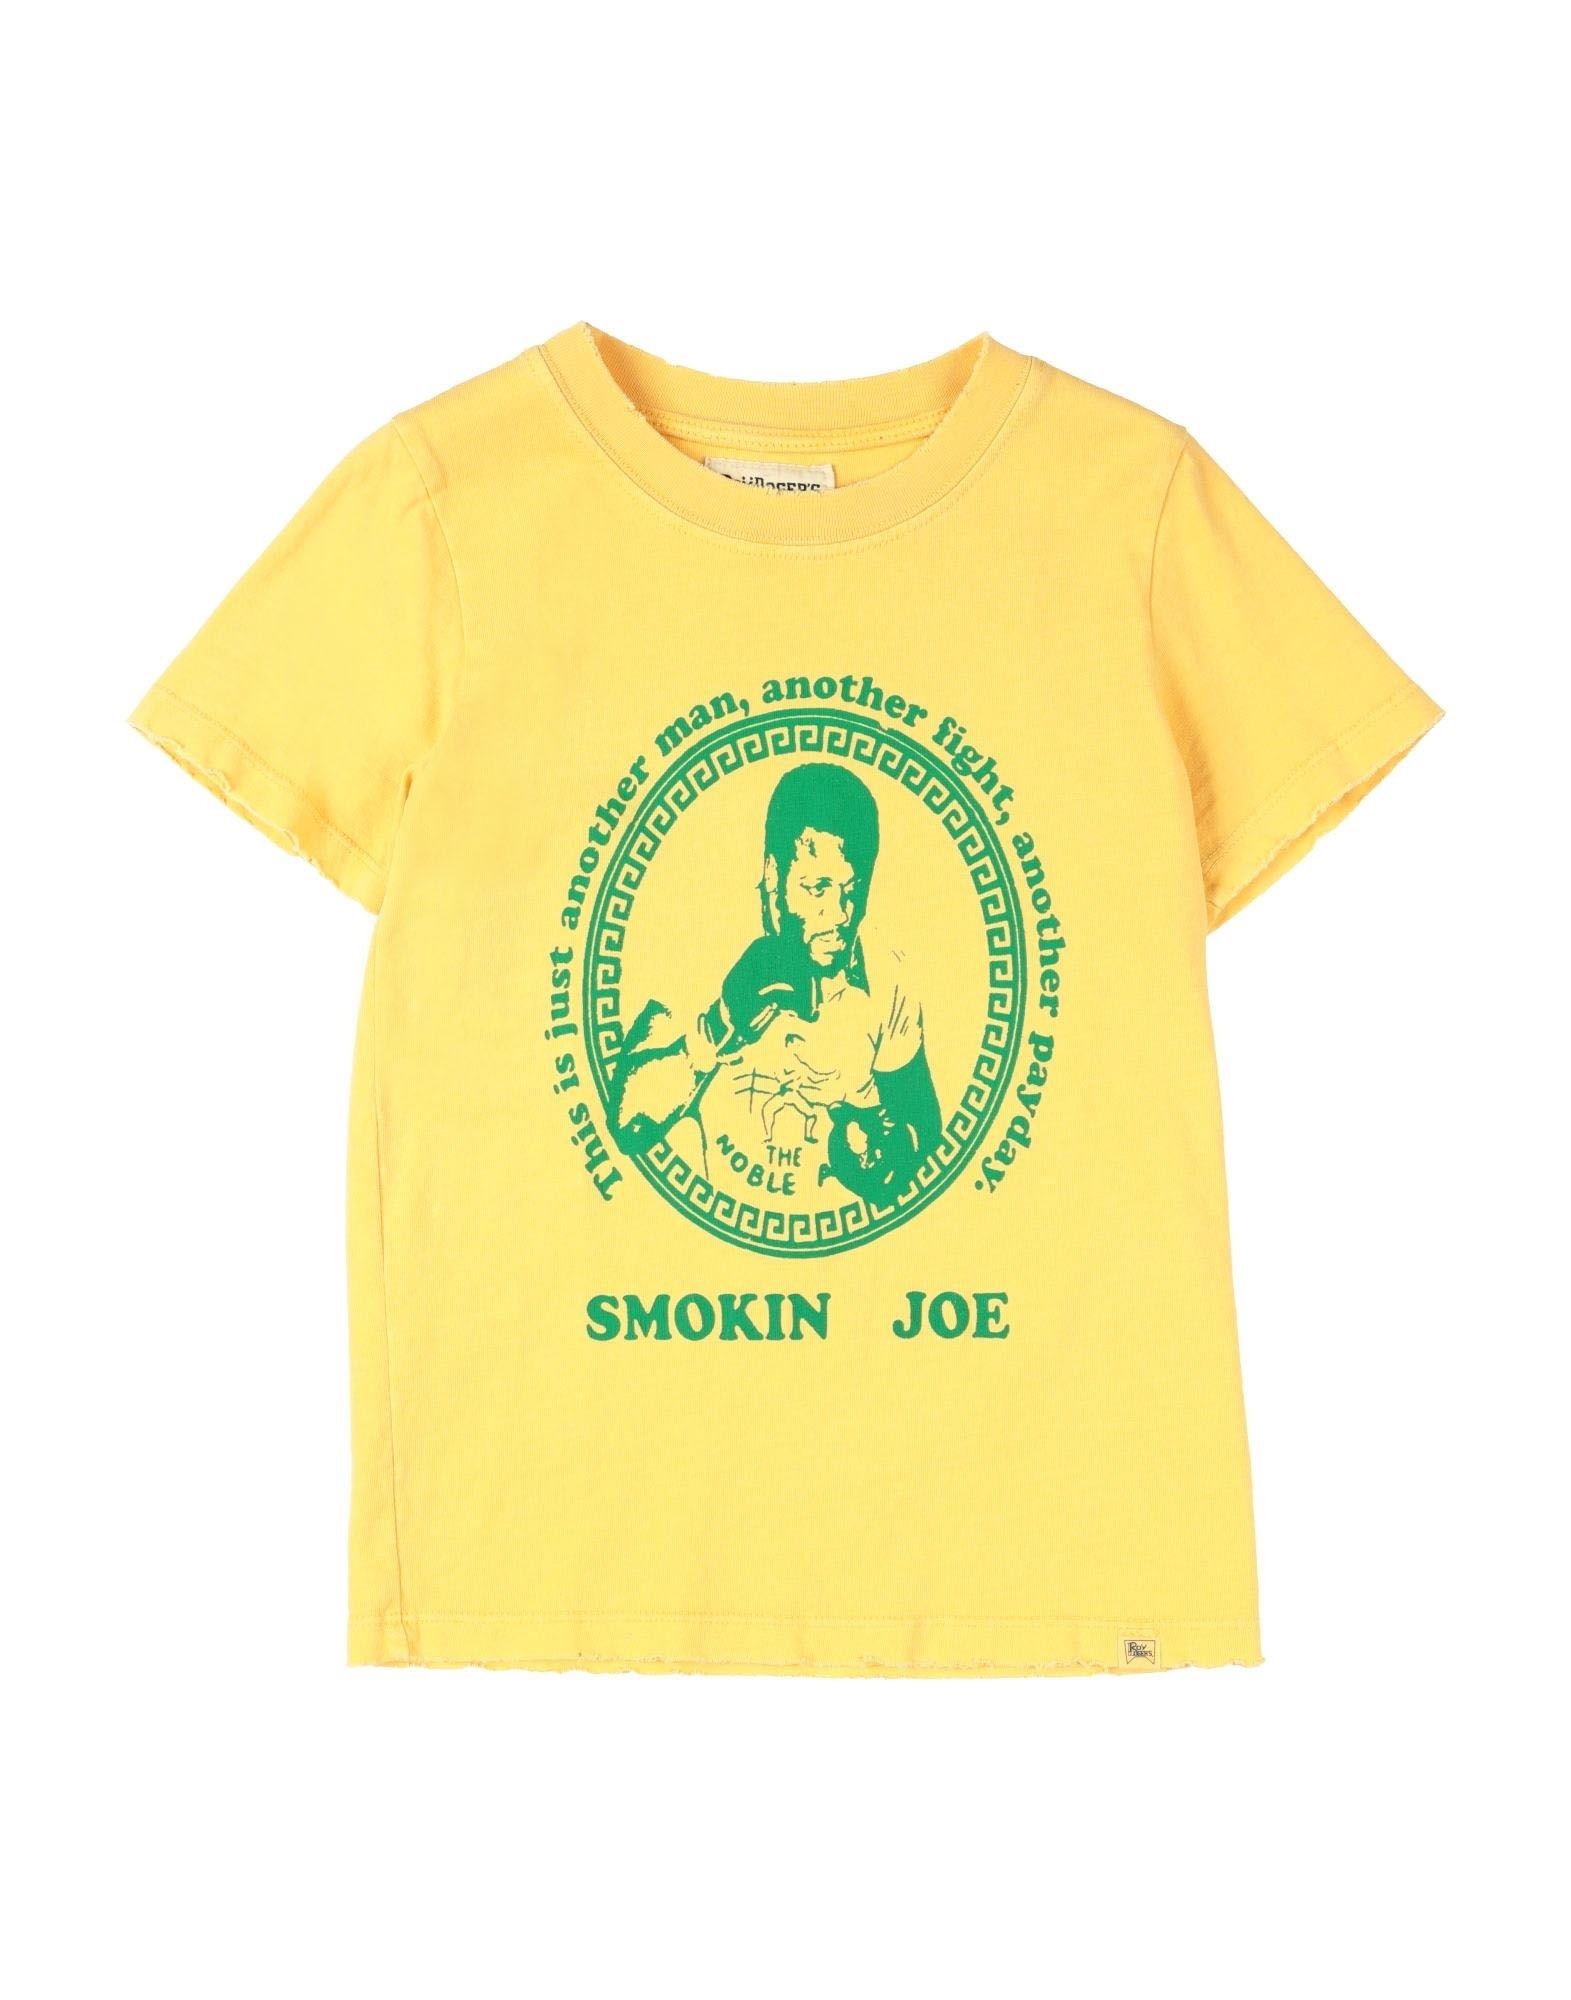 Roy Rogers Kids' Roÿ Roger's Toddler Boy T-shirt Yellow Size 6 Cotton